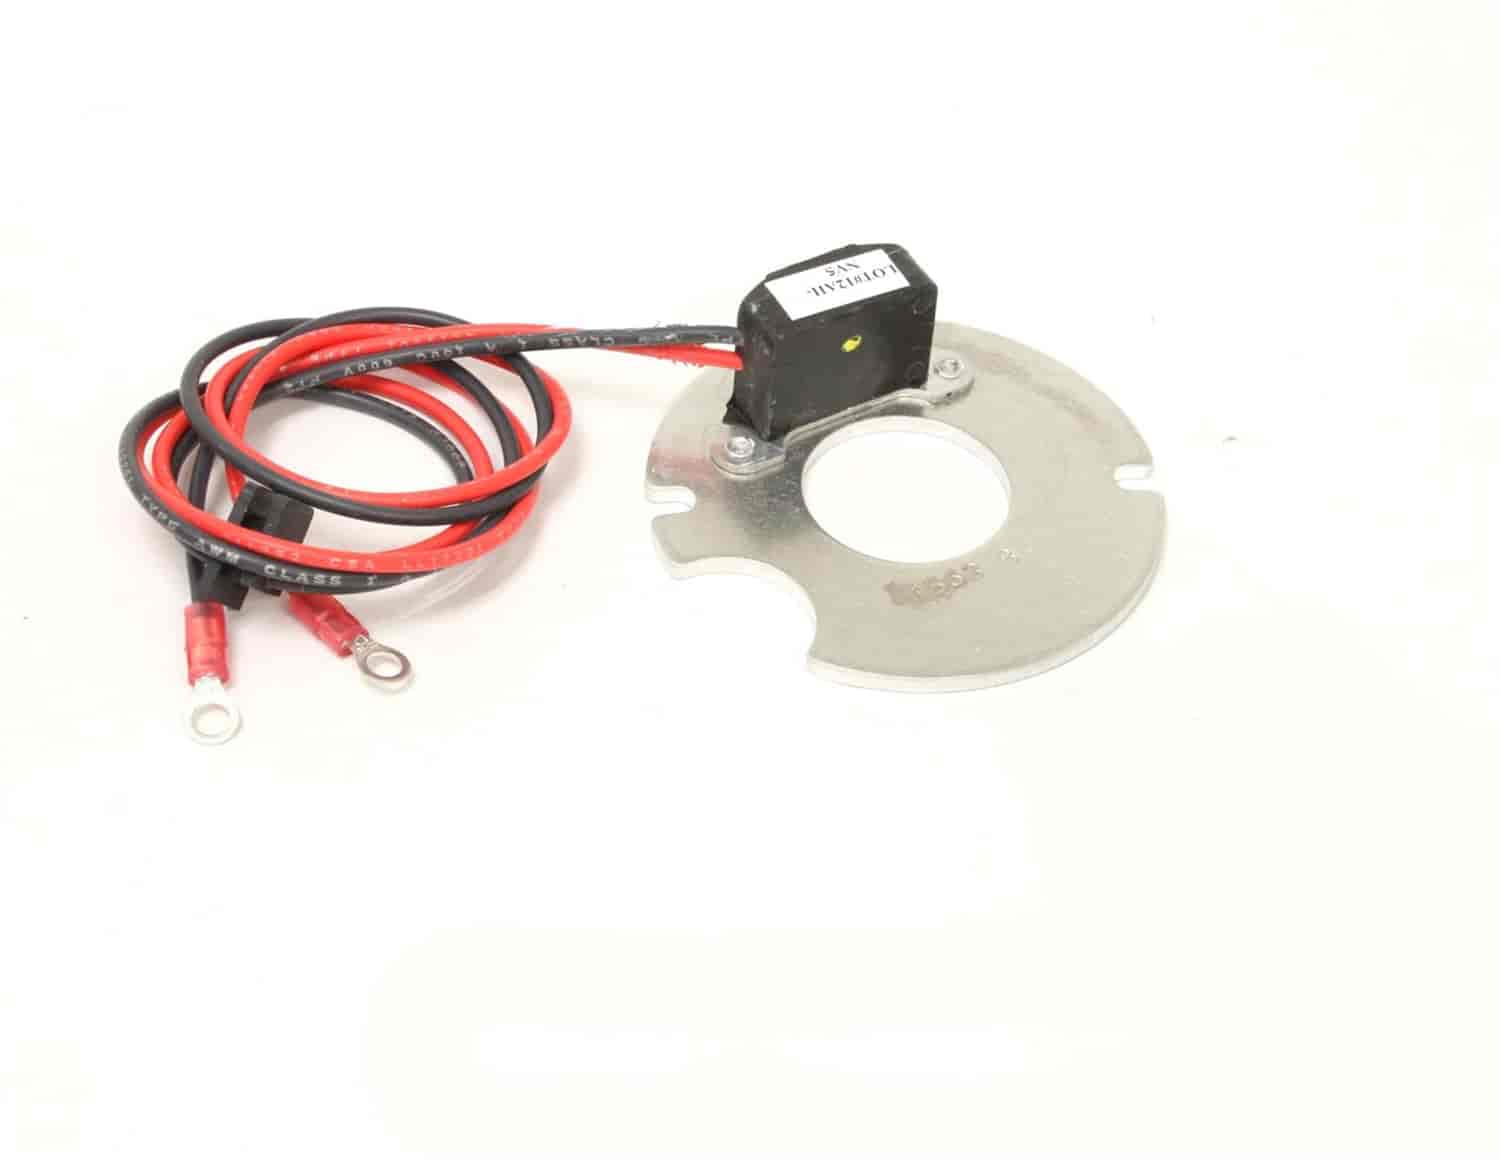 Module replacement for 1563B Ignitor Kit